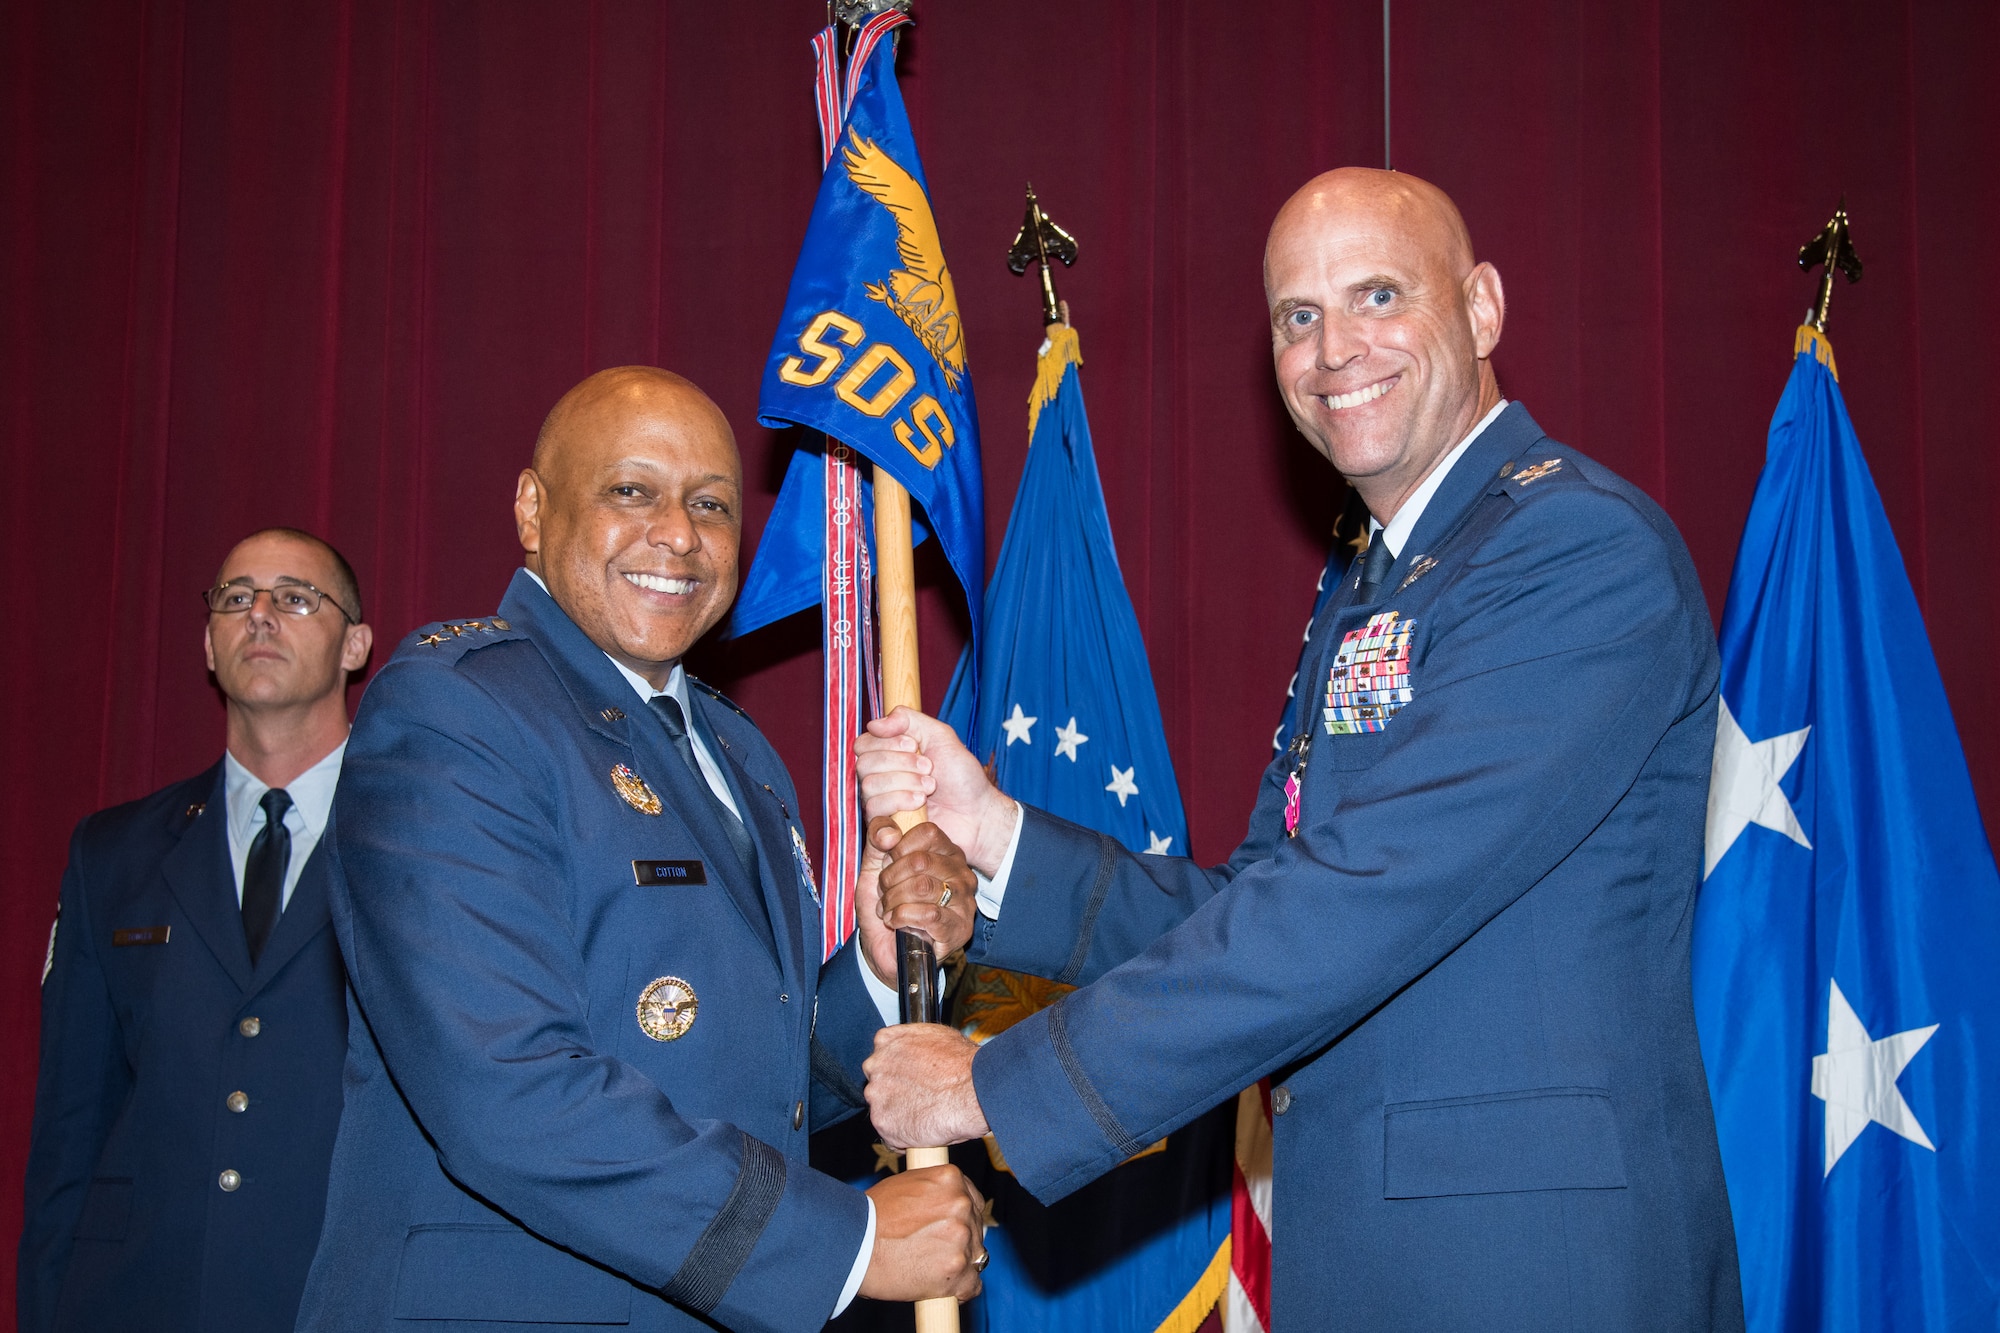 Lt. Gen. Anthony J. Cotton, Air University commander and president, receives the Squadron Officer School guidon from Col. Wayne W. Straw, prior commander and commandant of SOS, during a change of command ceremony August 2, 2019, at Maxwell Air Force Base, Alabama. Straw will be moving on to serve as an instructor at Air University's Air War College.